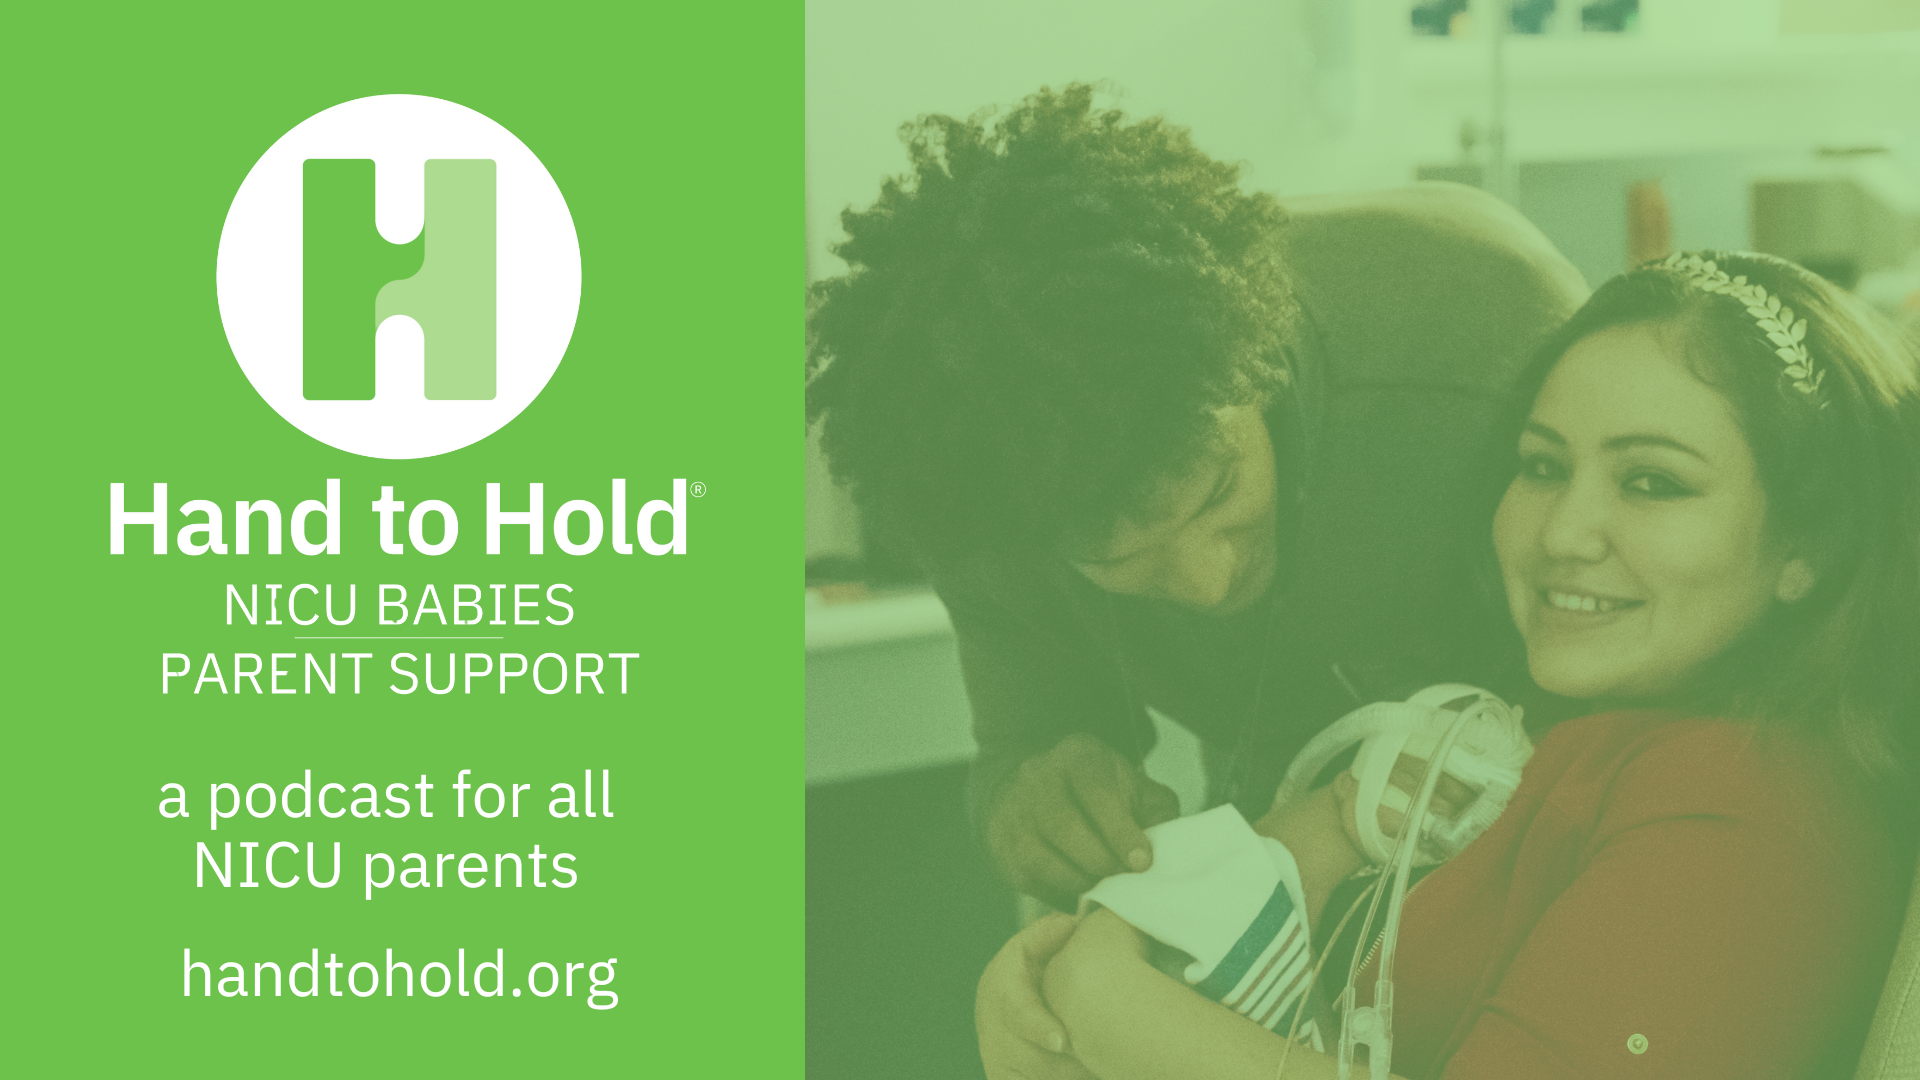 nicu babies parent support podcast, hand to hold